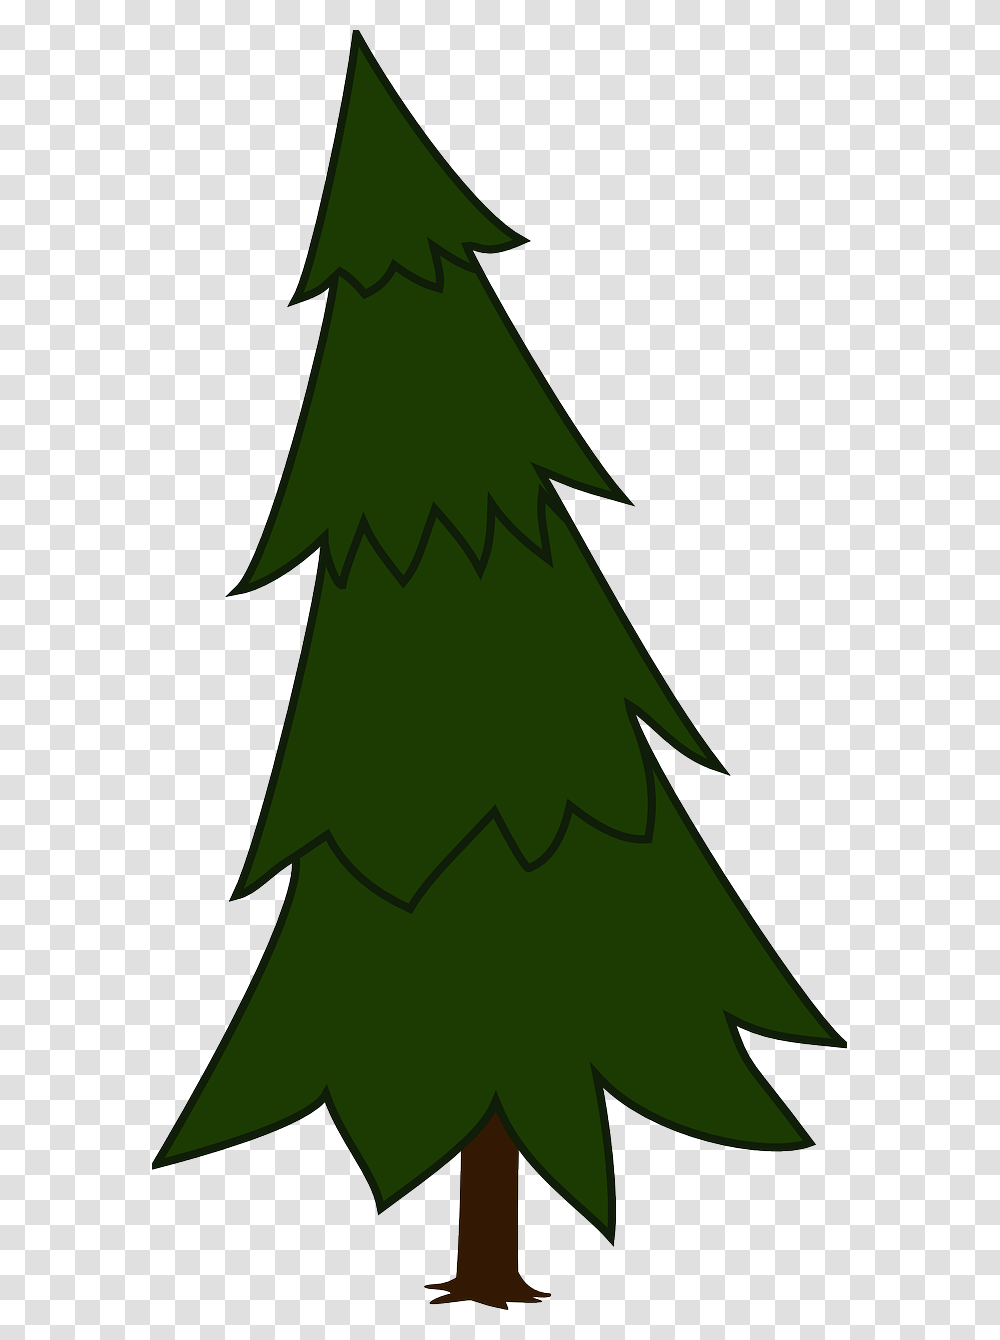 Spruce Tree Clip Art Tree Clipart Pine, Plant, Ornament, Pattern, Christmas Tree Transparent Png